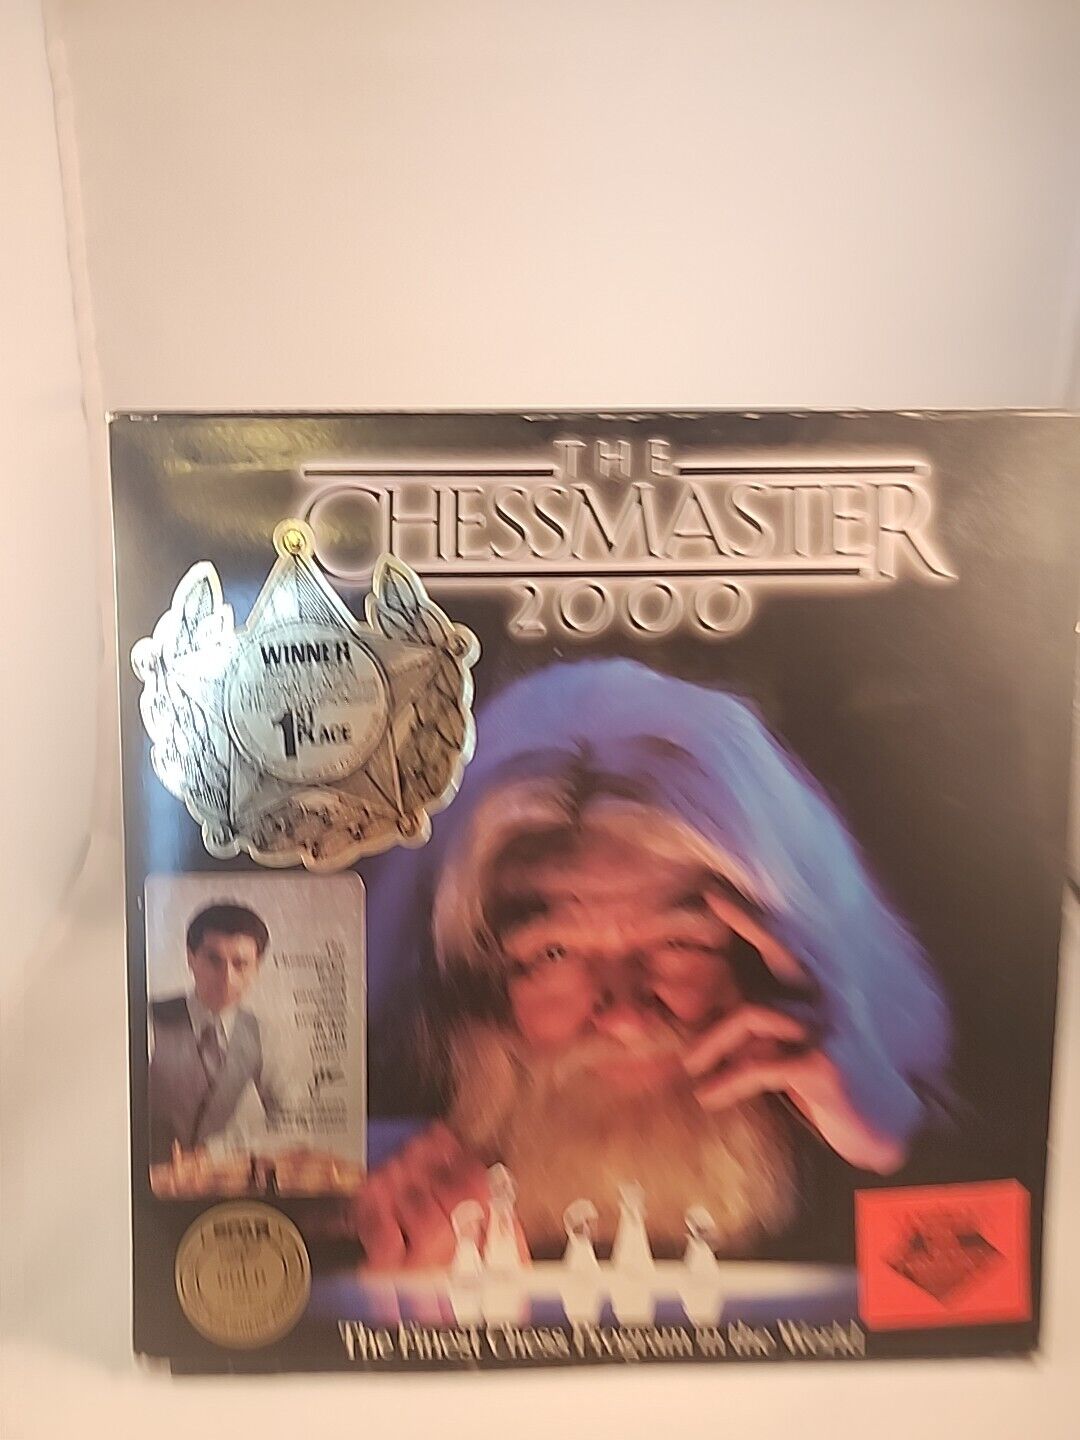 The Chess Master 2000 Complete Vintage Computer Game ( Ibm/tandy) Retro Classic